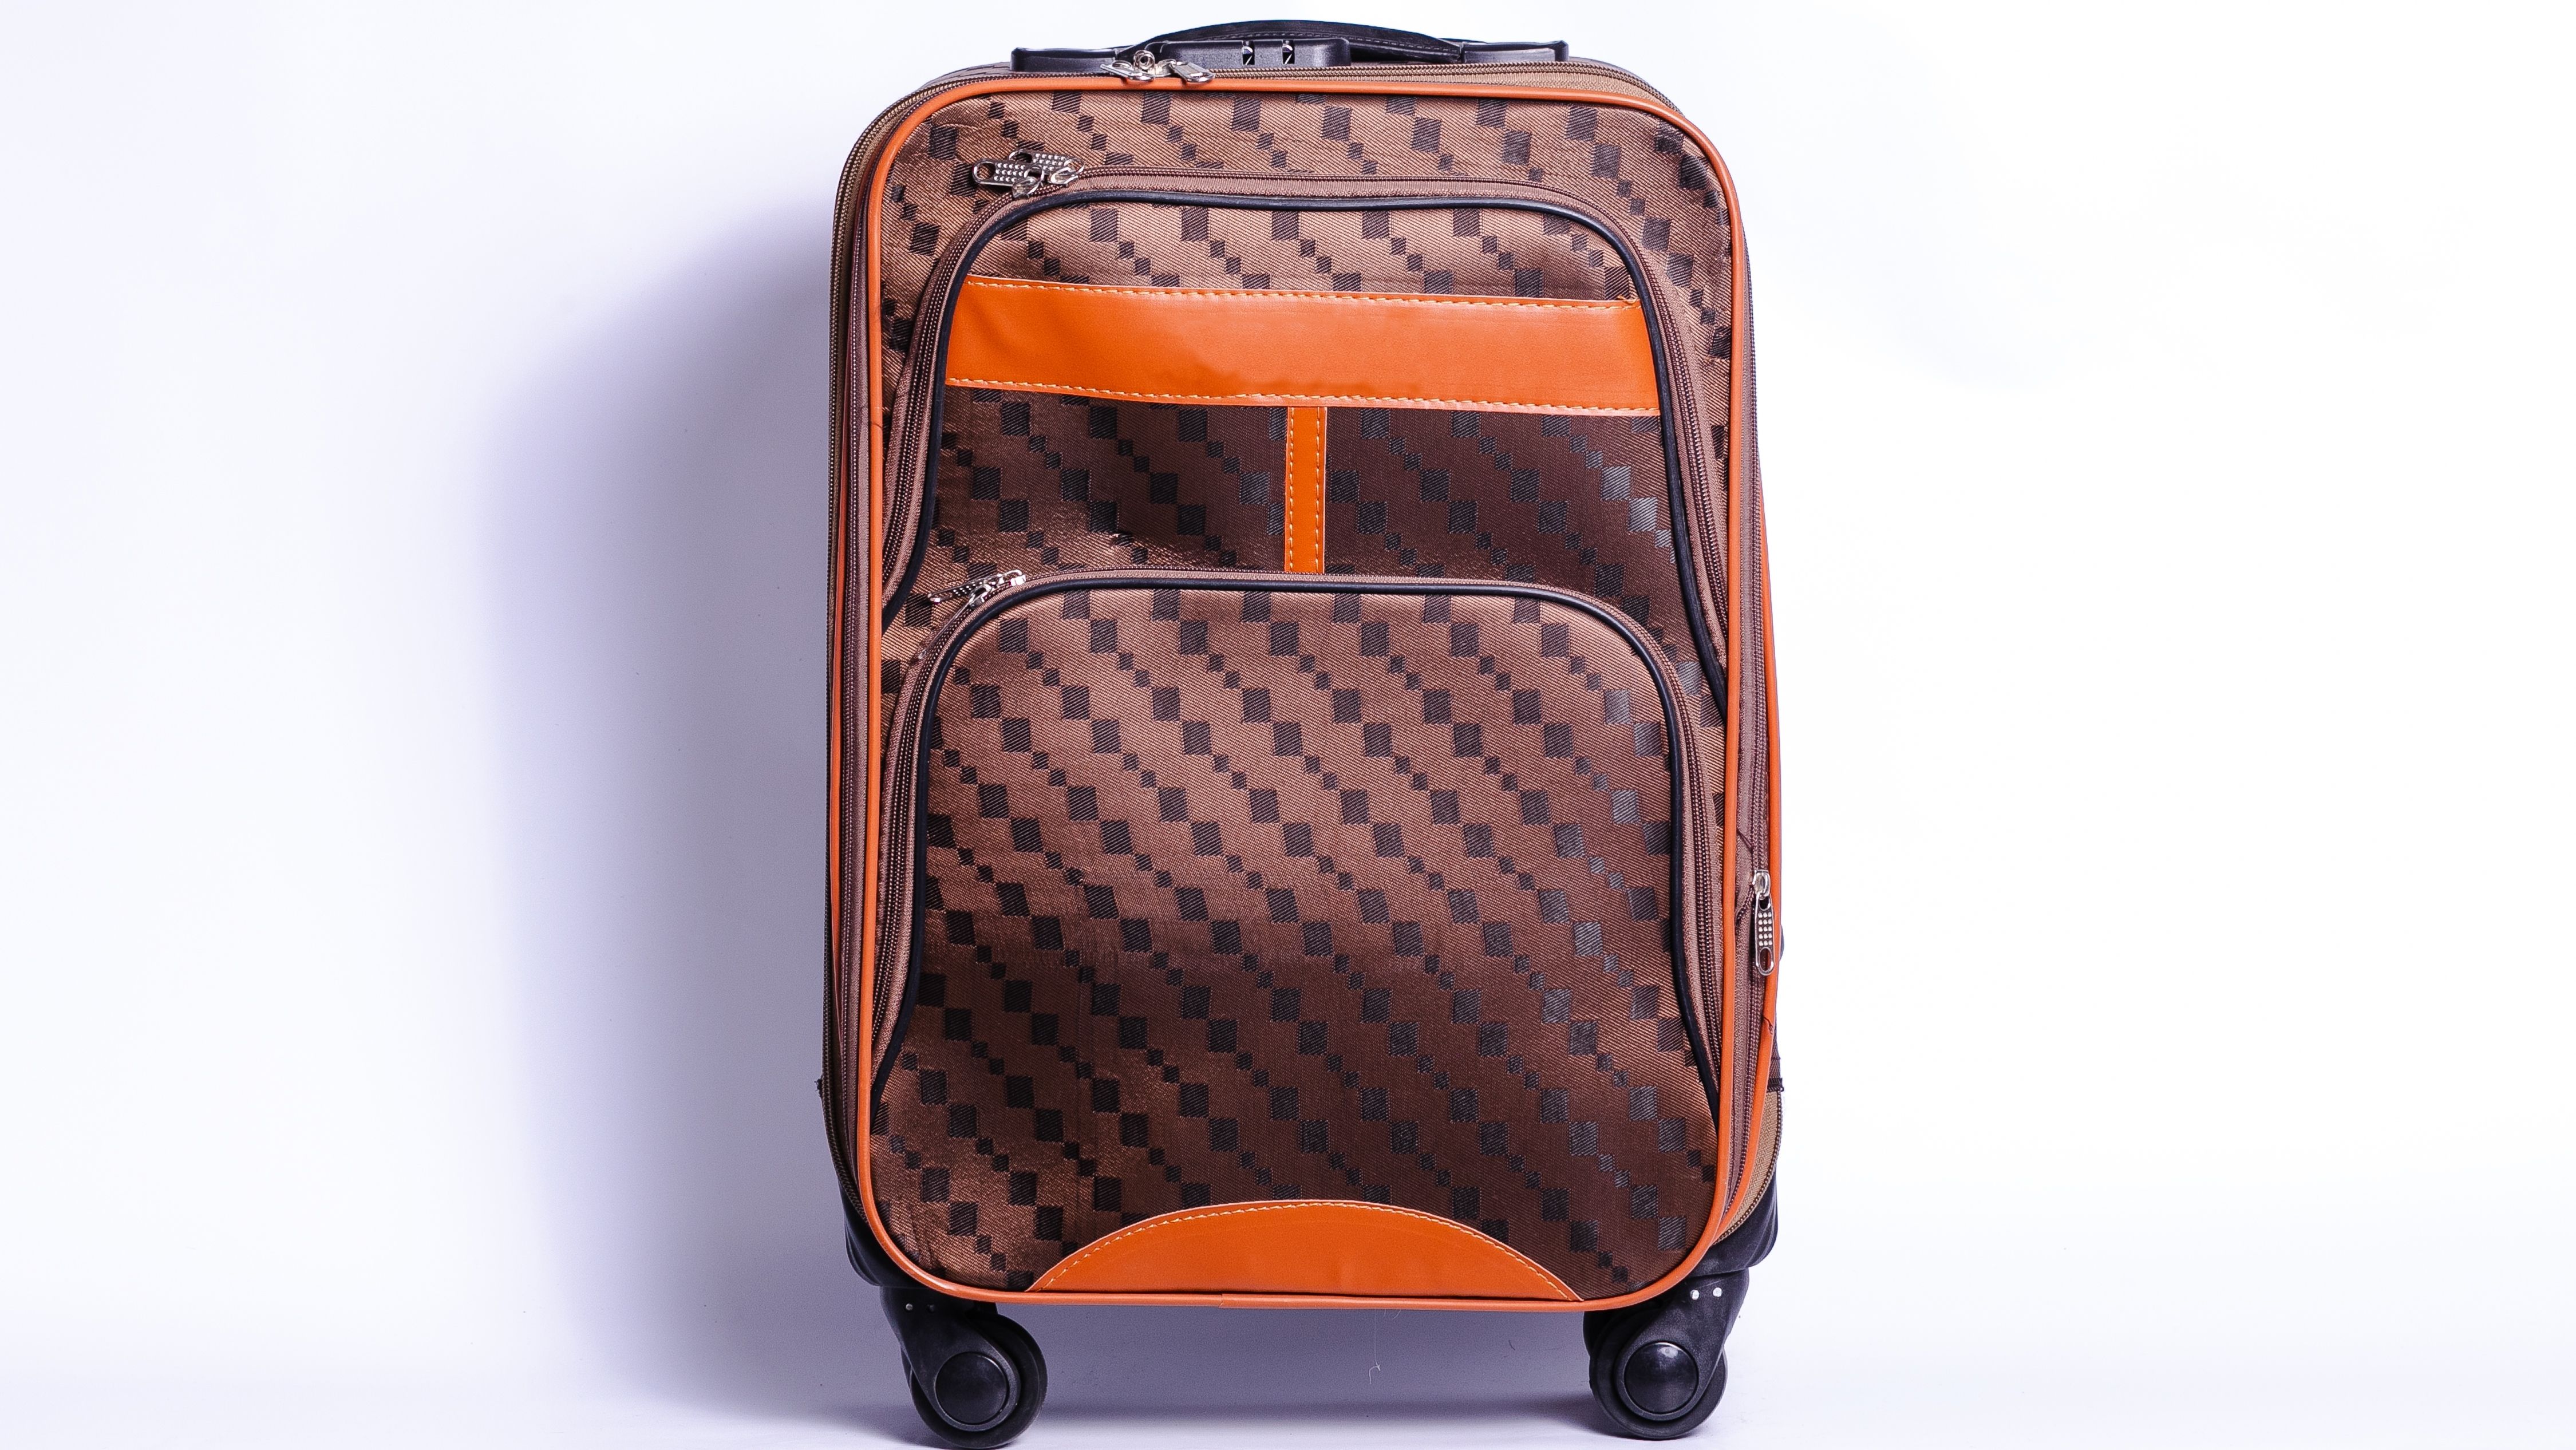 Designer soft sided luggage with a distinctive brown checkered pattern and orange accents, equipped with wheels and an extendable handle.